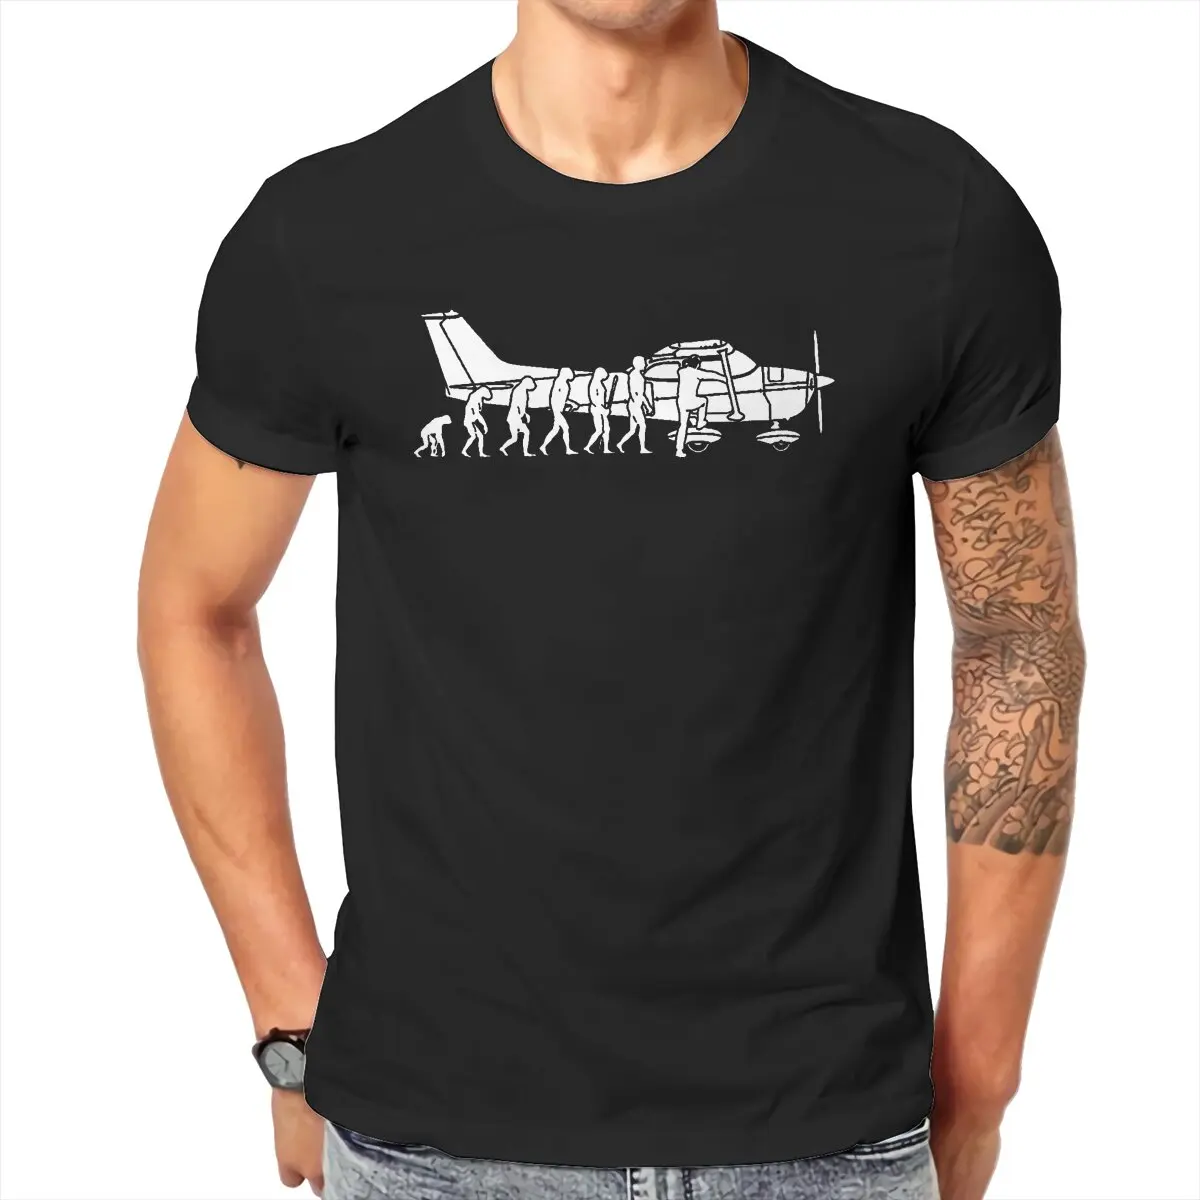 

Funny Evolution Cessna Pilot Airplane T-Shirts for Men O Neck 100% Cotton T Shirts Short Sleeve Tee Shirt Gift Idea Clothing